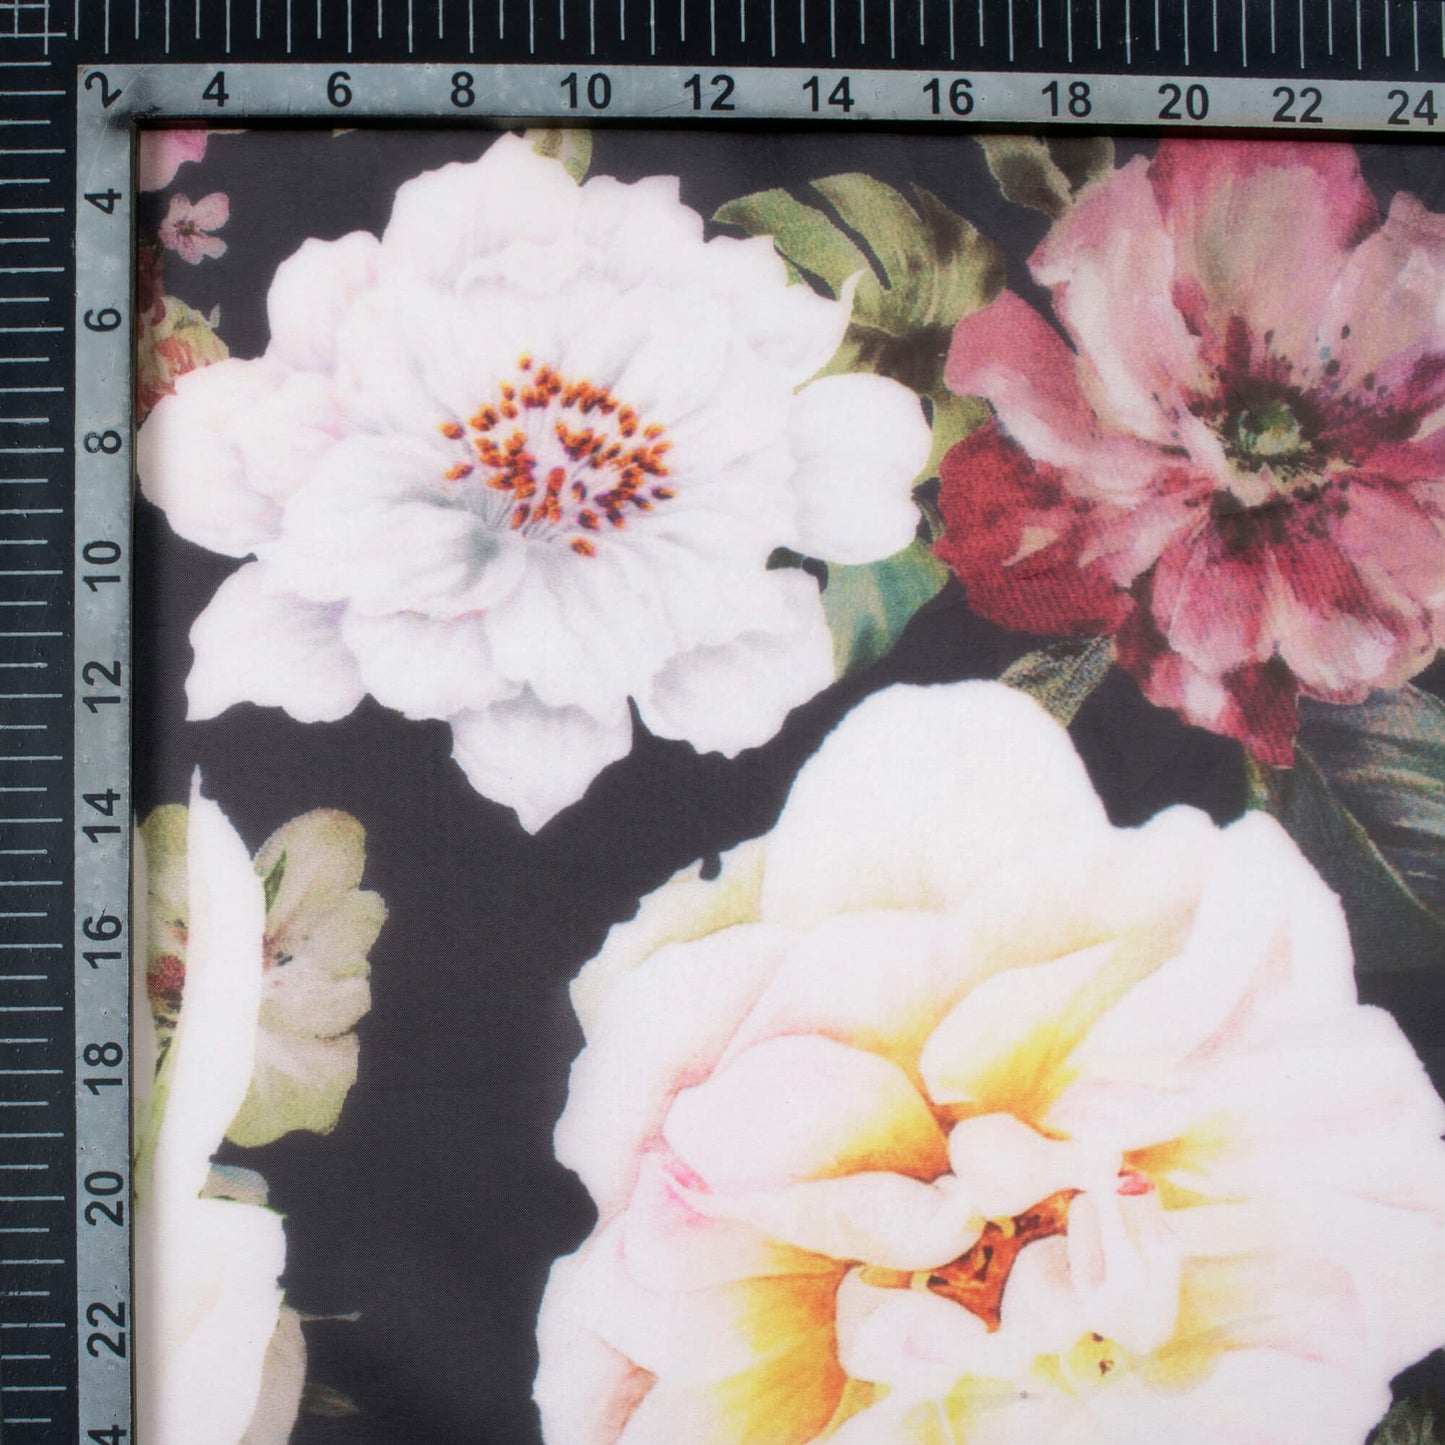 Black And Off White Floral Pattern Digital Print Organza Satin Fabric